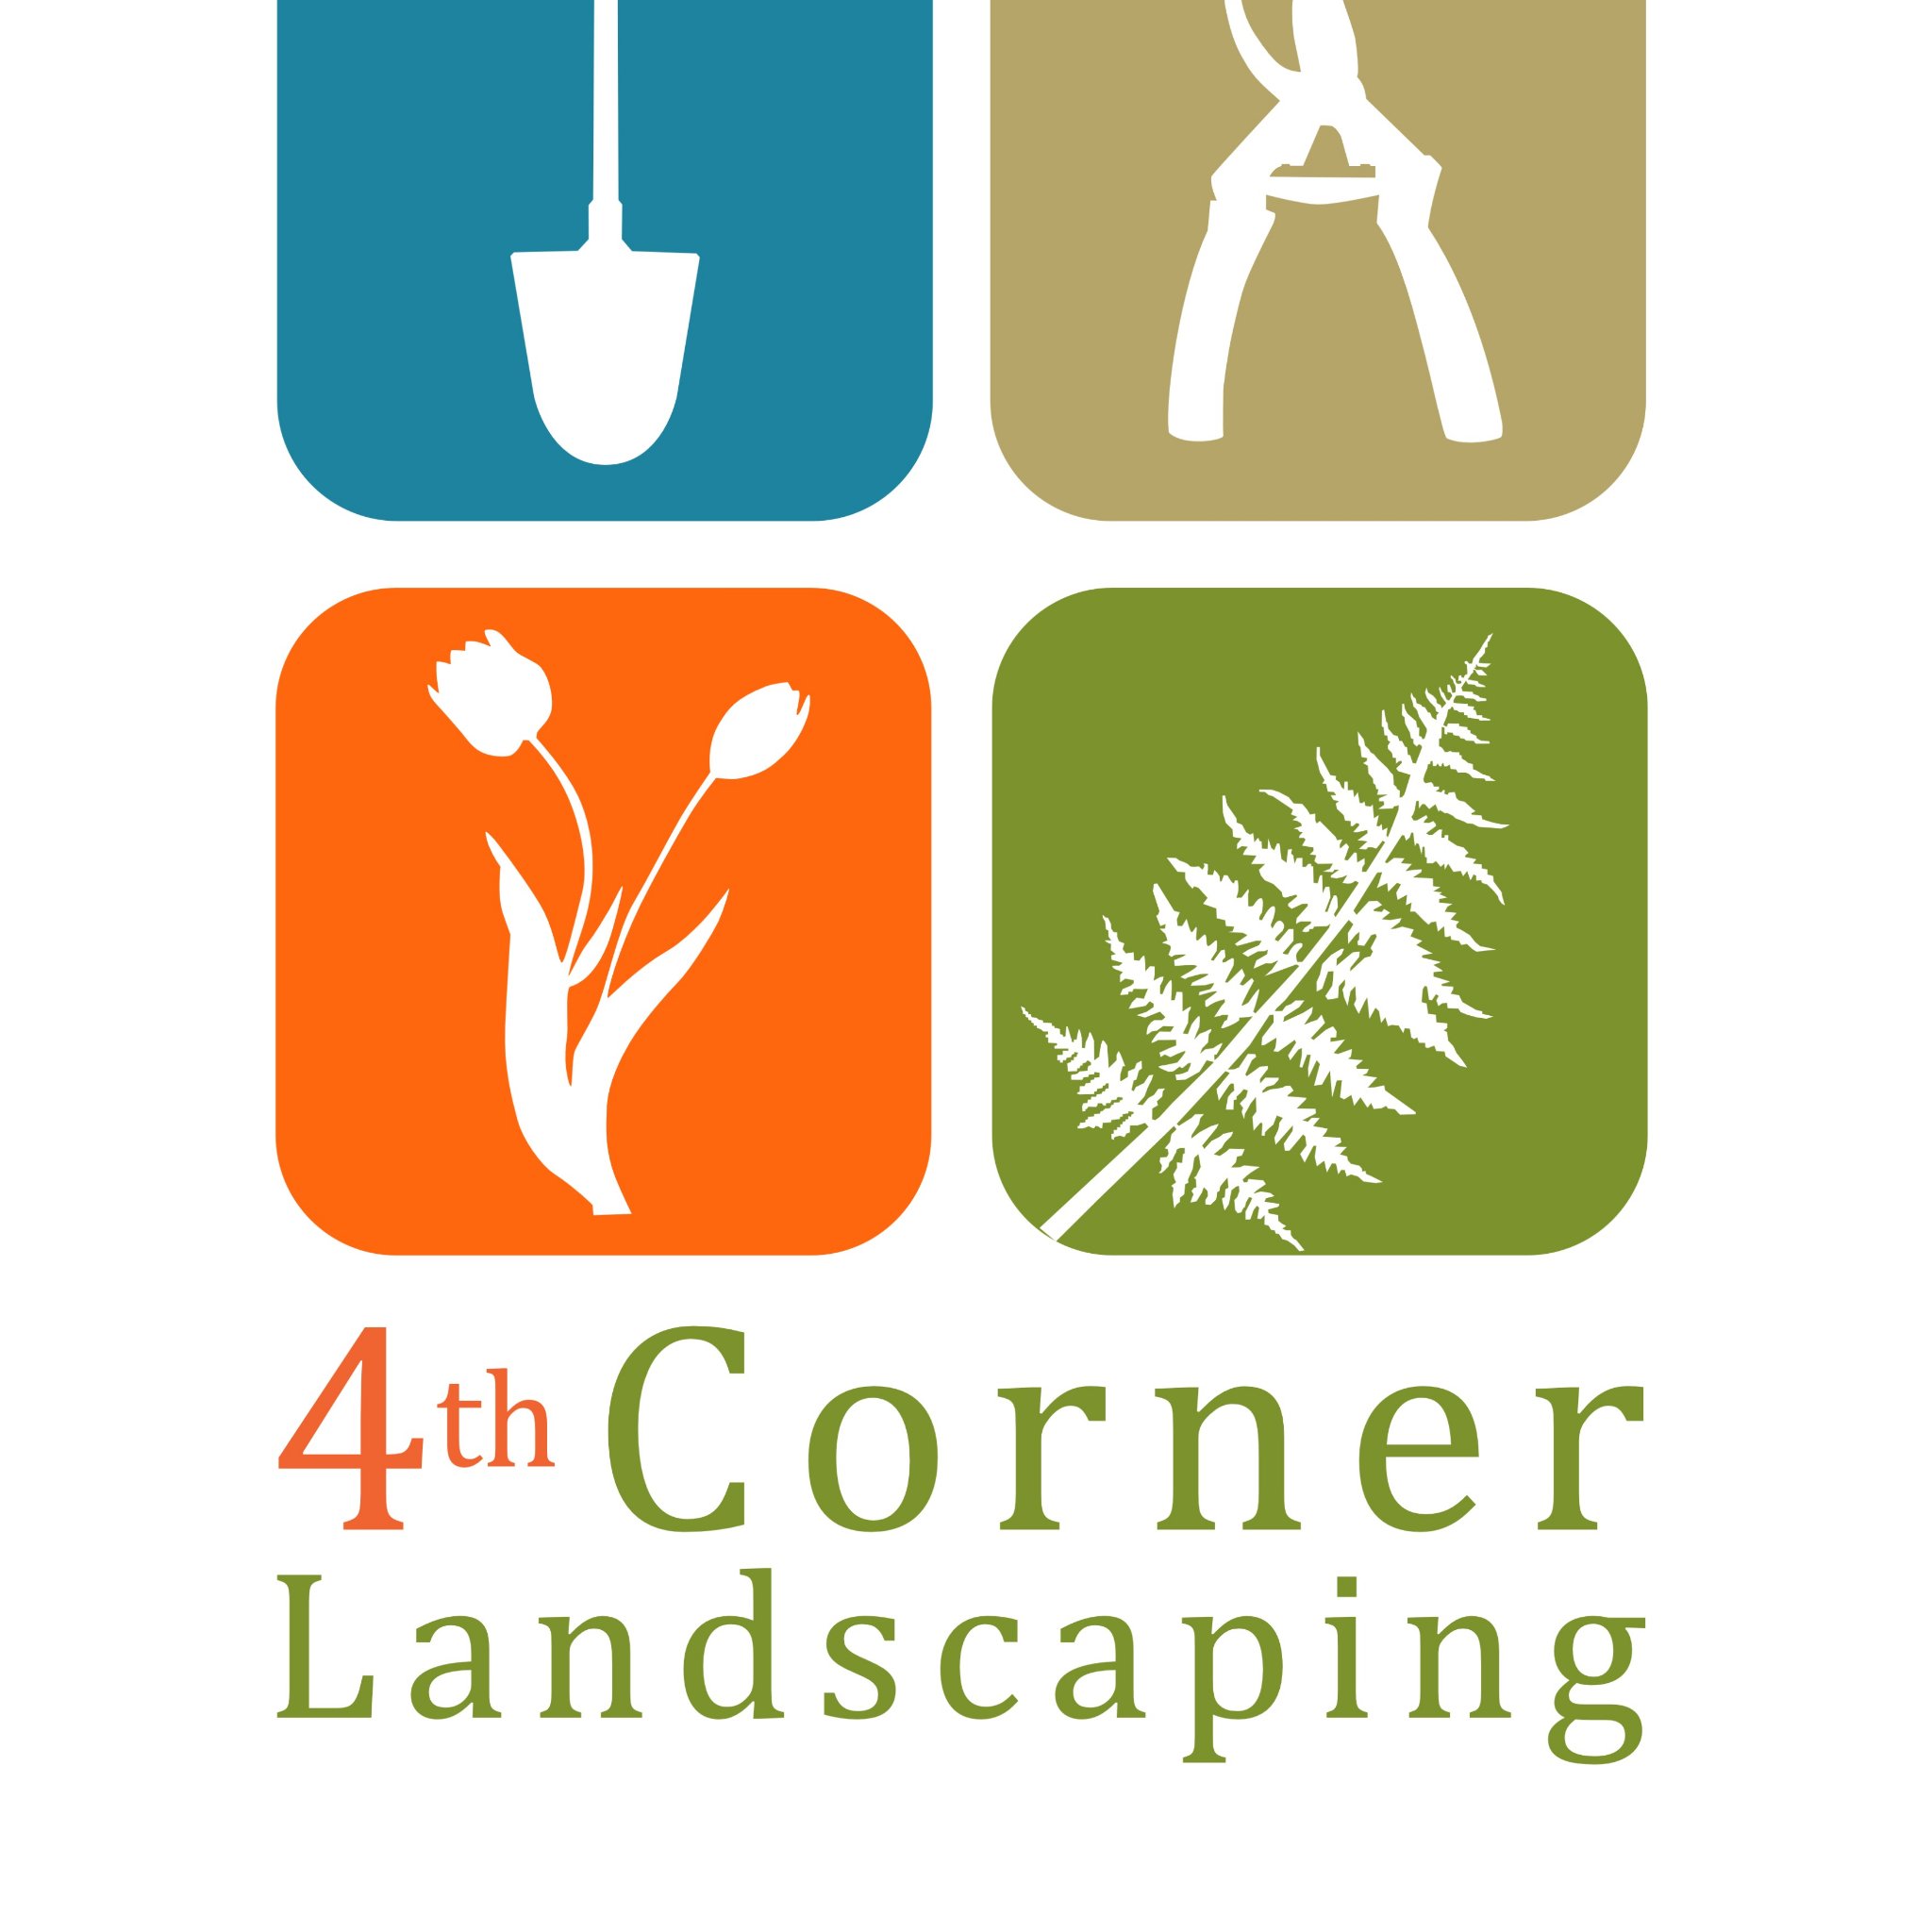 4th Corner Landscaping is a thriving family business based across the Midlands and South.  We deliver Landscaping & Grounds Maintenance Services.